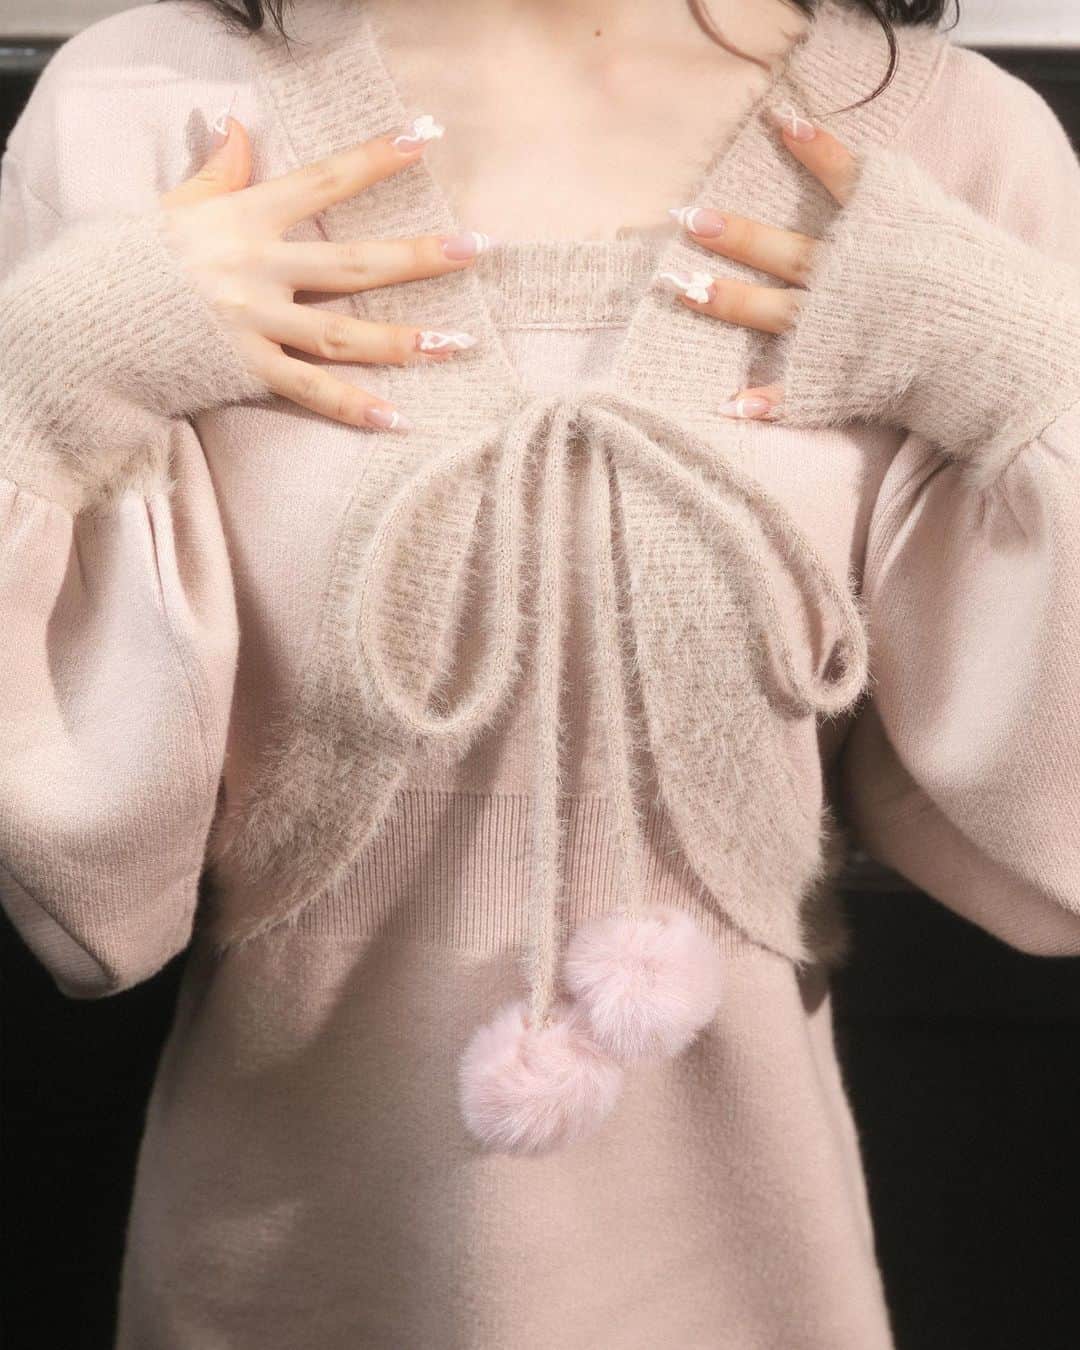 BUBBLESのインスタグラム：「ㅤㅤㅤㅤㅤㅤㅤㅤㅤㅤㅤㅤㅤ ㅤㅤㅤㅤㅤㅤㅤㅤㅤㅤㅤㅤㅤ BUBBLES Winter / November,2023  ☑︎ feather ensemble knit one-piece ¥9,500+tax color :  pink / ivory / black https://www.sparklingmall.jp/c/sparklingmall_all/BS71331 ㅤㅤㅤㅤㅤㅤㅤㅤㅤㅤㅤ _____________________________________________  #bubbles #bubblestokyo  #bubbles_shibuya #bubbles_shinjuku #bubblessawthecity #bubbles #new #clothing #fashion #style #styleinspo #girly #classicalgirly #brushgirly #harajuku #shibuya #newarrival #november #aw #winter #2023_BUBBLES #November2023_BUBBLES」